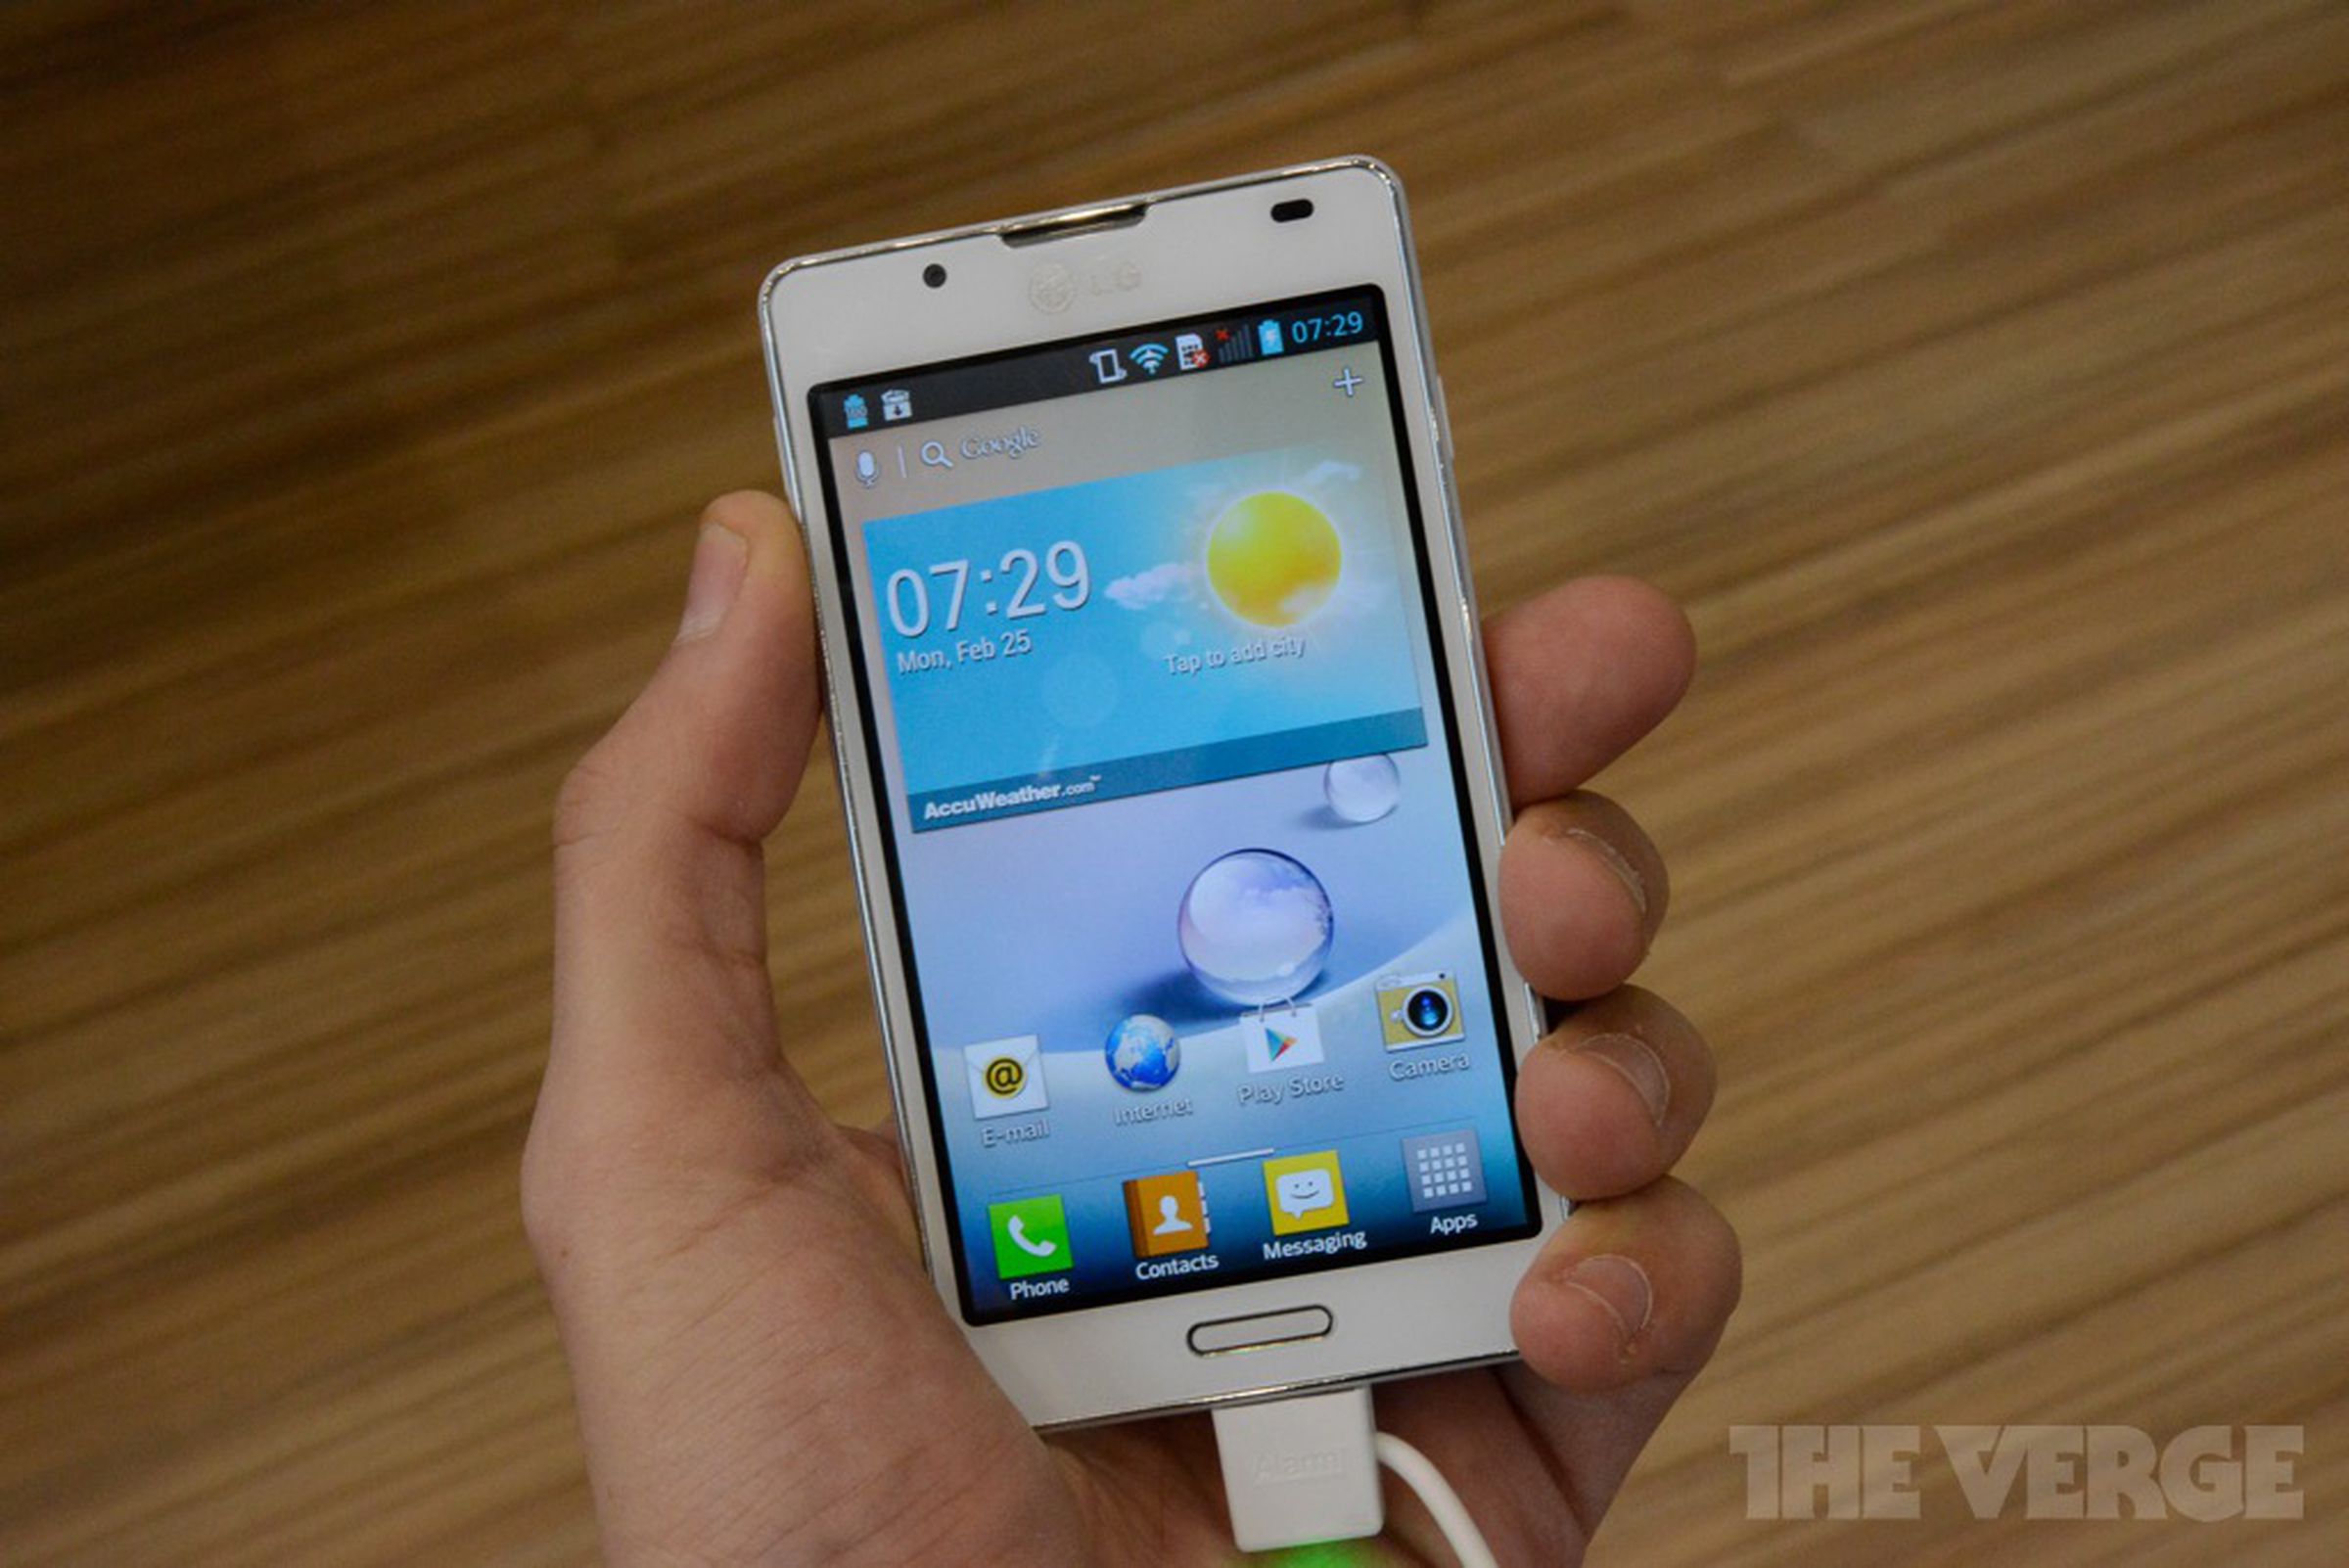 LG Optimus L7 II hands-on pictures